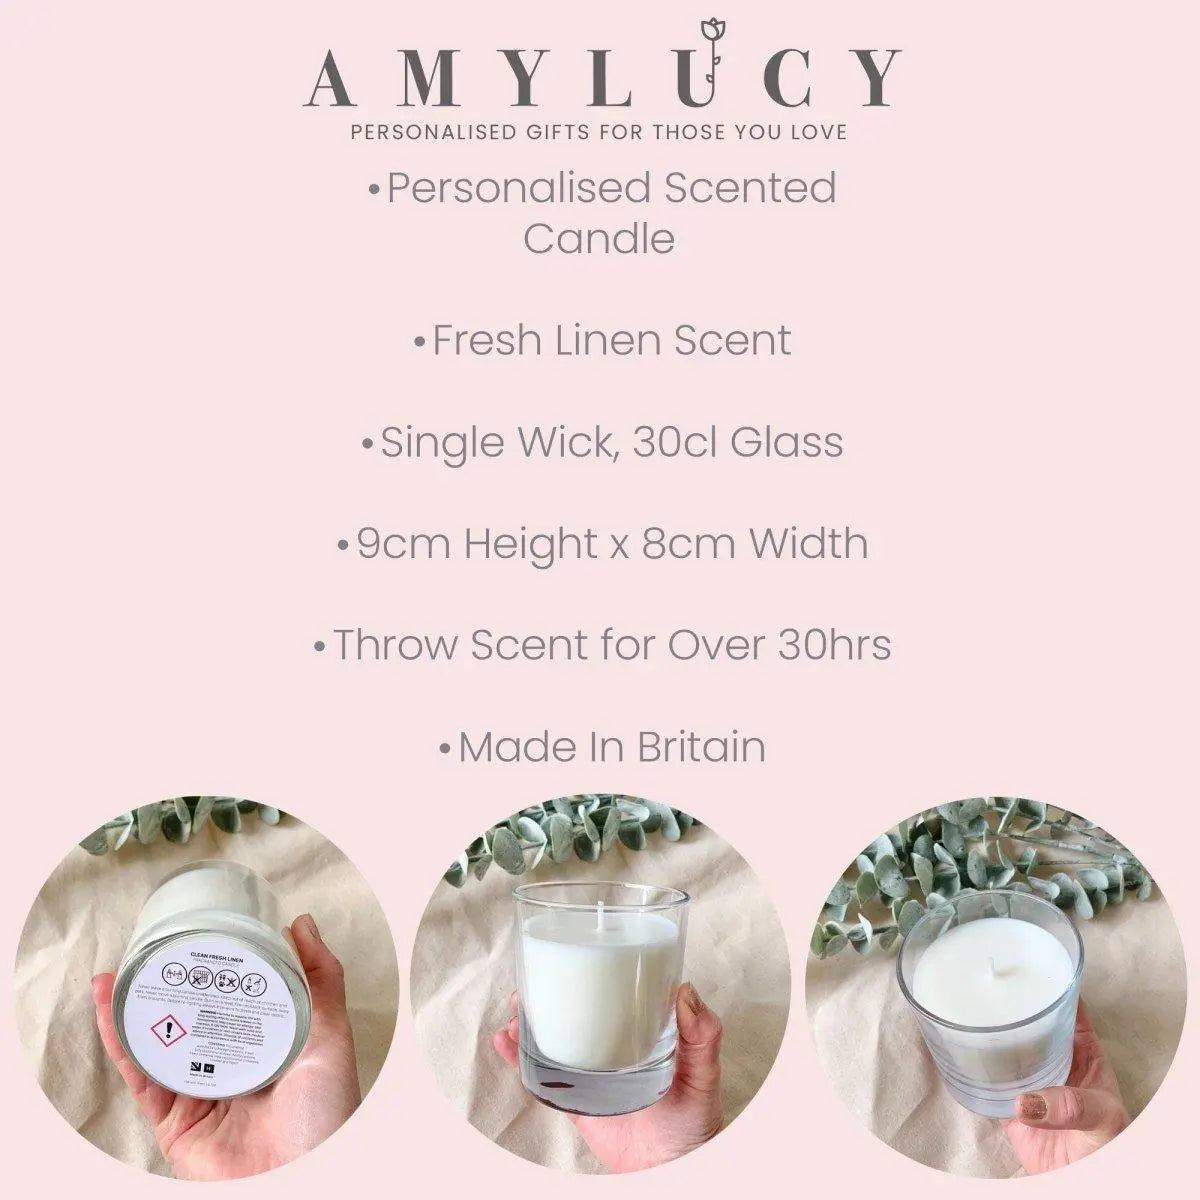 Personalised Nanny Gift, Nanny Gift Candle, Personalised Candle, Granny Pink Heart Gift, Scented Candle in Jar, Custom Candle Nan, Friend - Amy Lucy